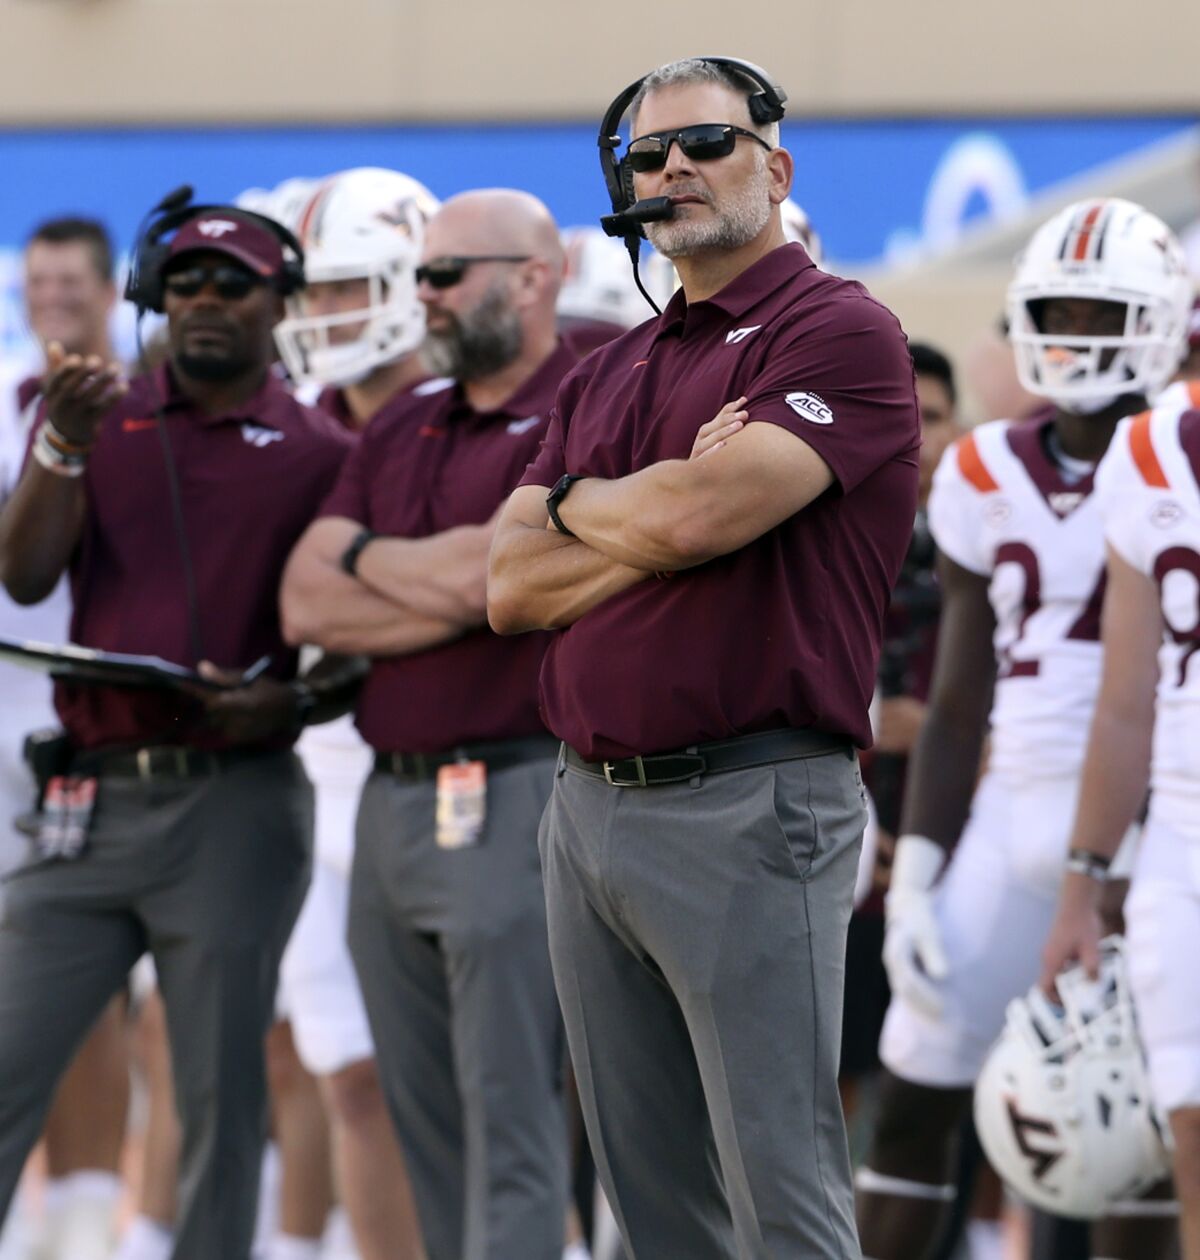 Virginia Tech head coach Justin Fuentes stands on the sideline in the second half of an NCAA college football game against Middle Tennessee, Saturday, Sept. 11, 2021, in Blacksburg Va. (AP Photo/Matt Gentry)